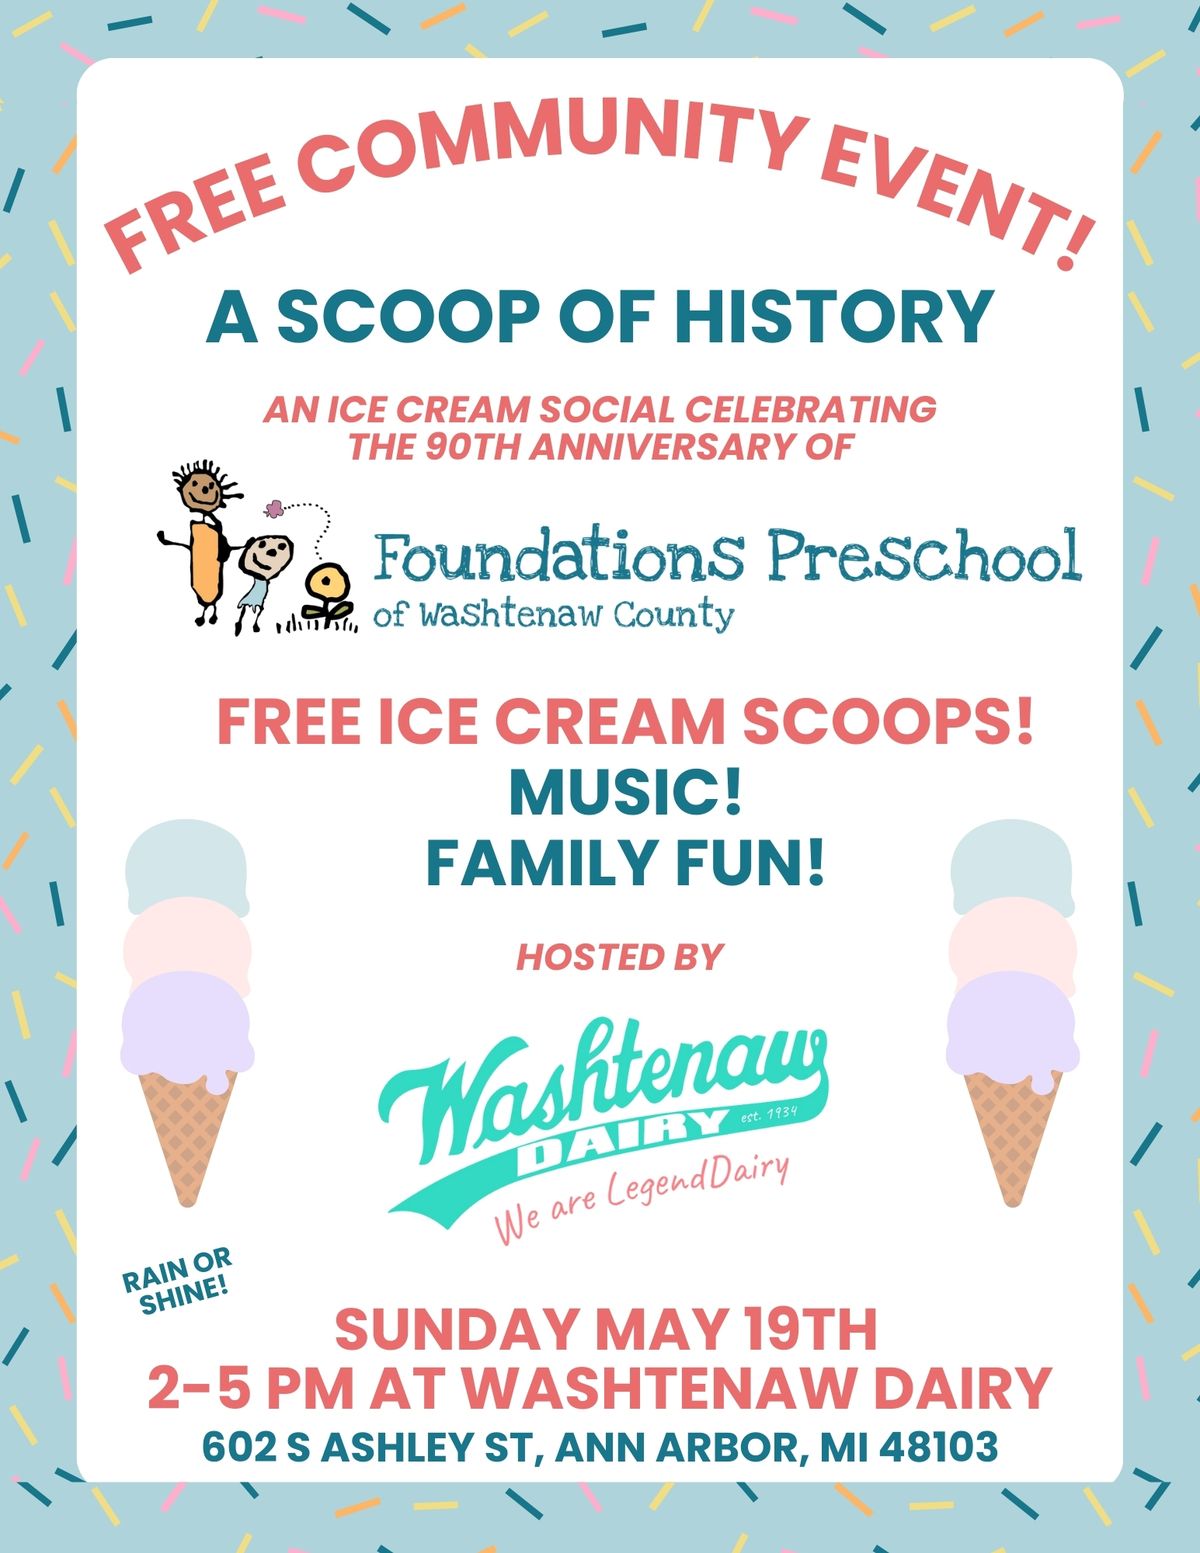 A SCOOP OF HISTORY Celebrating 90 Years of Foundations Preschool of Washtenaw County!